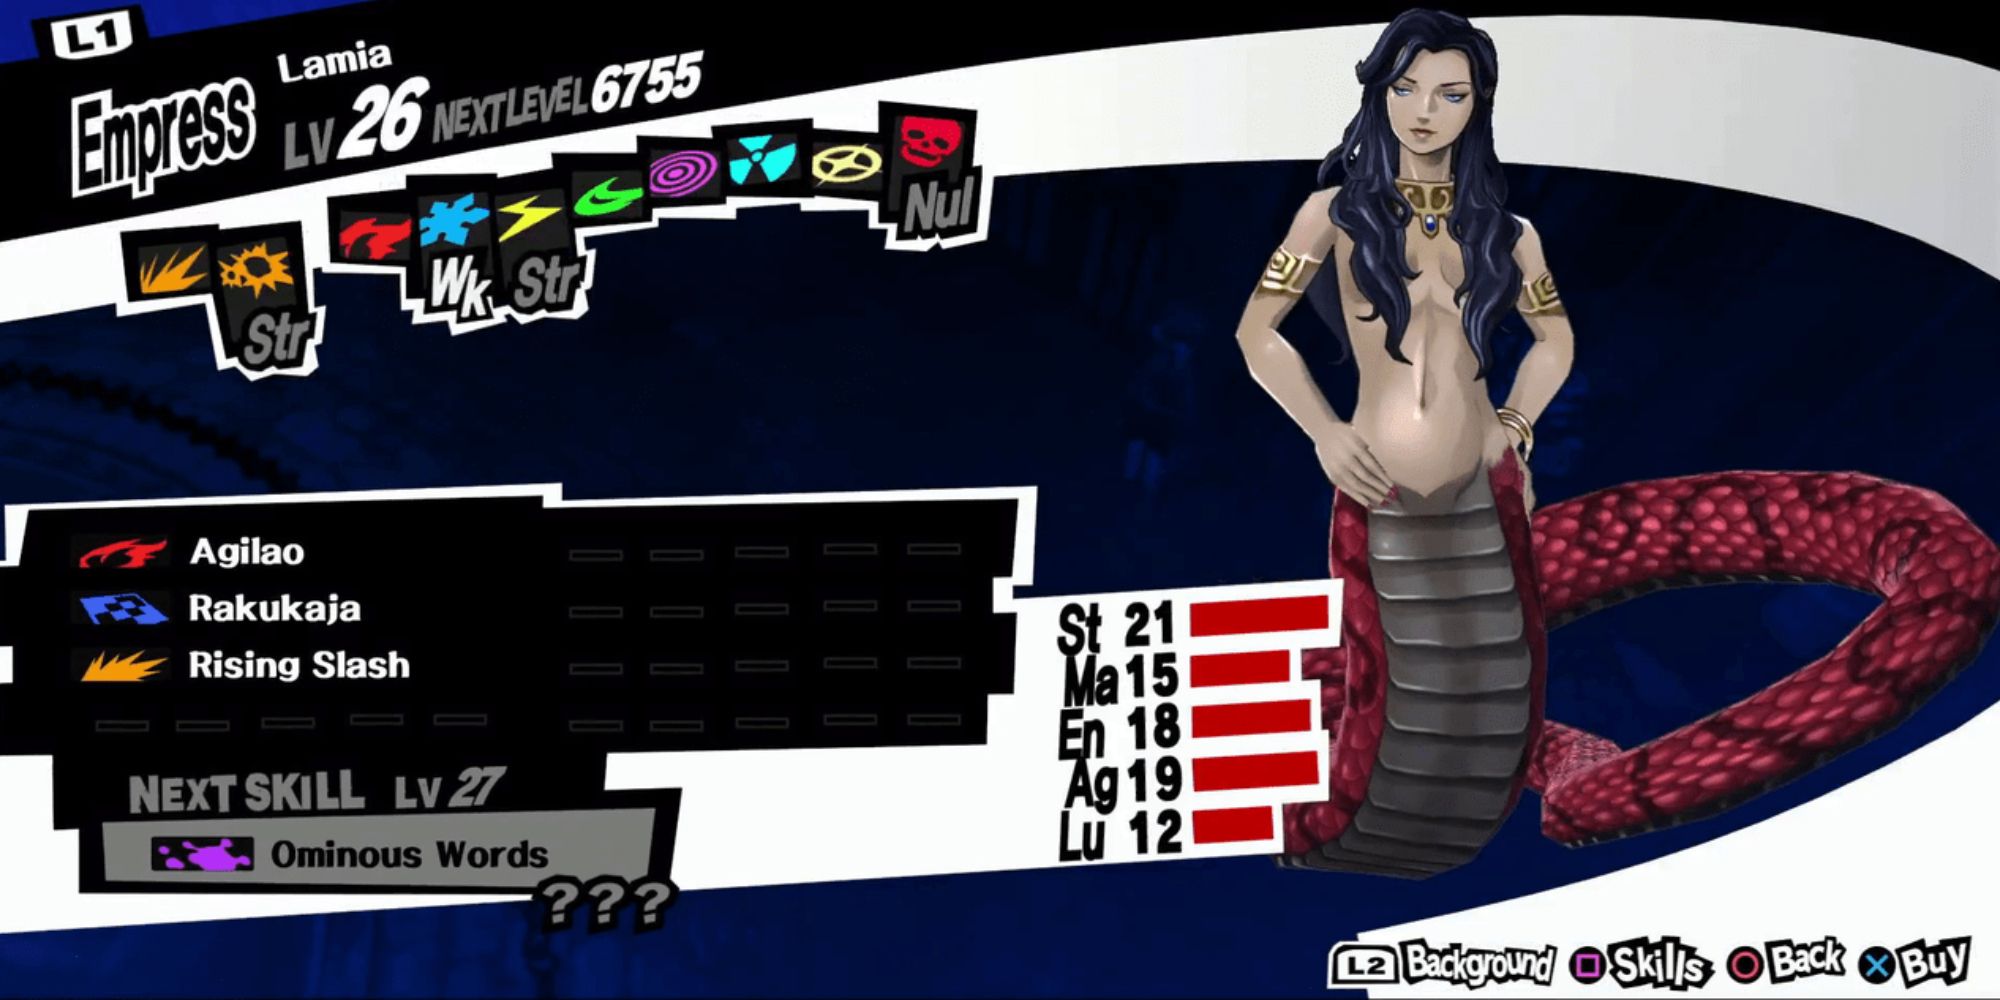 The half woman half snake Persona Lamia as featured in Persona 5, with her stats and abilties